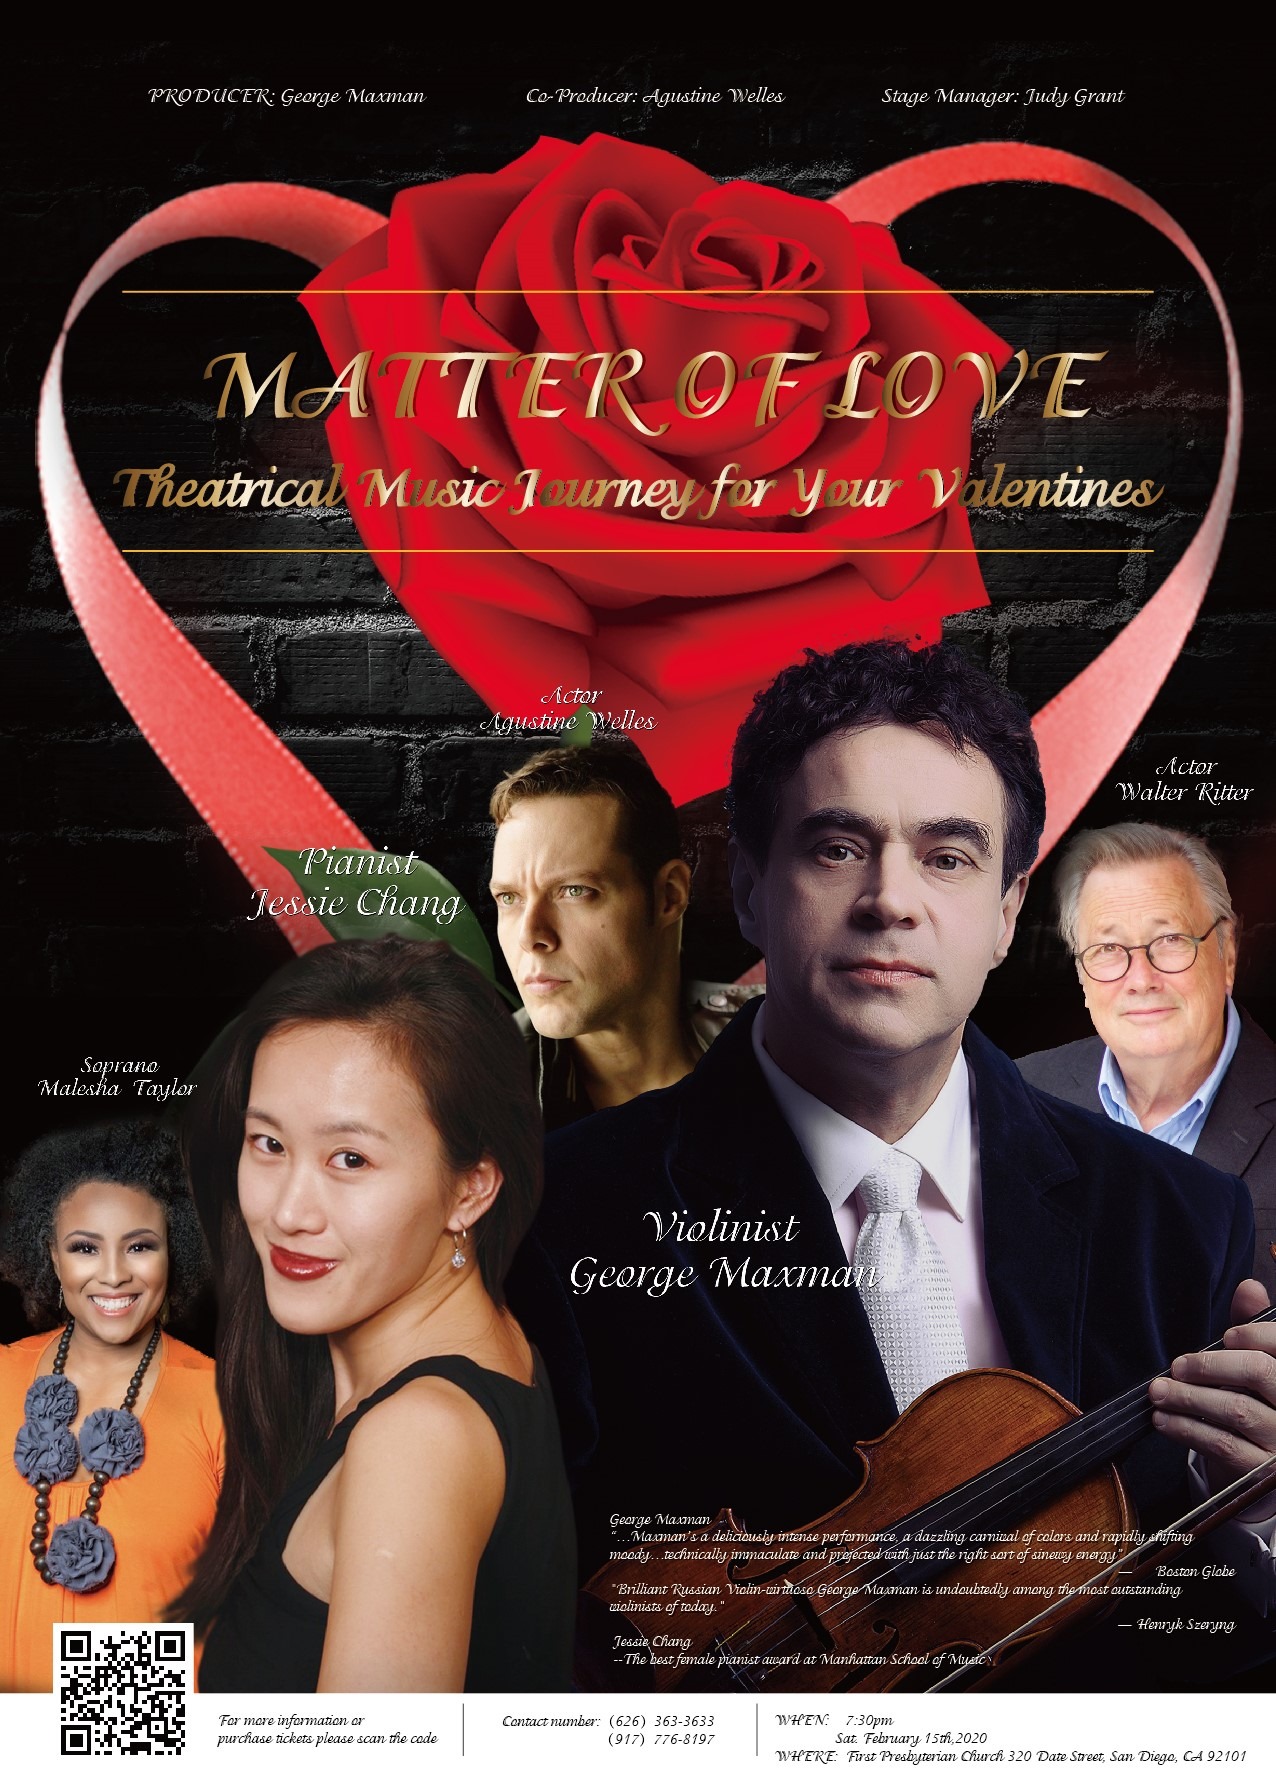 Matter of Love - A Theatrical Music Journey for Your Valentines